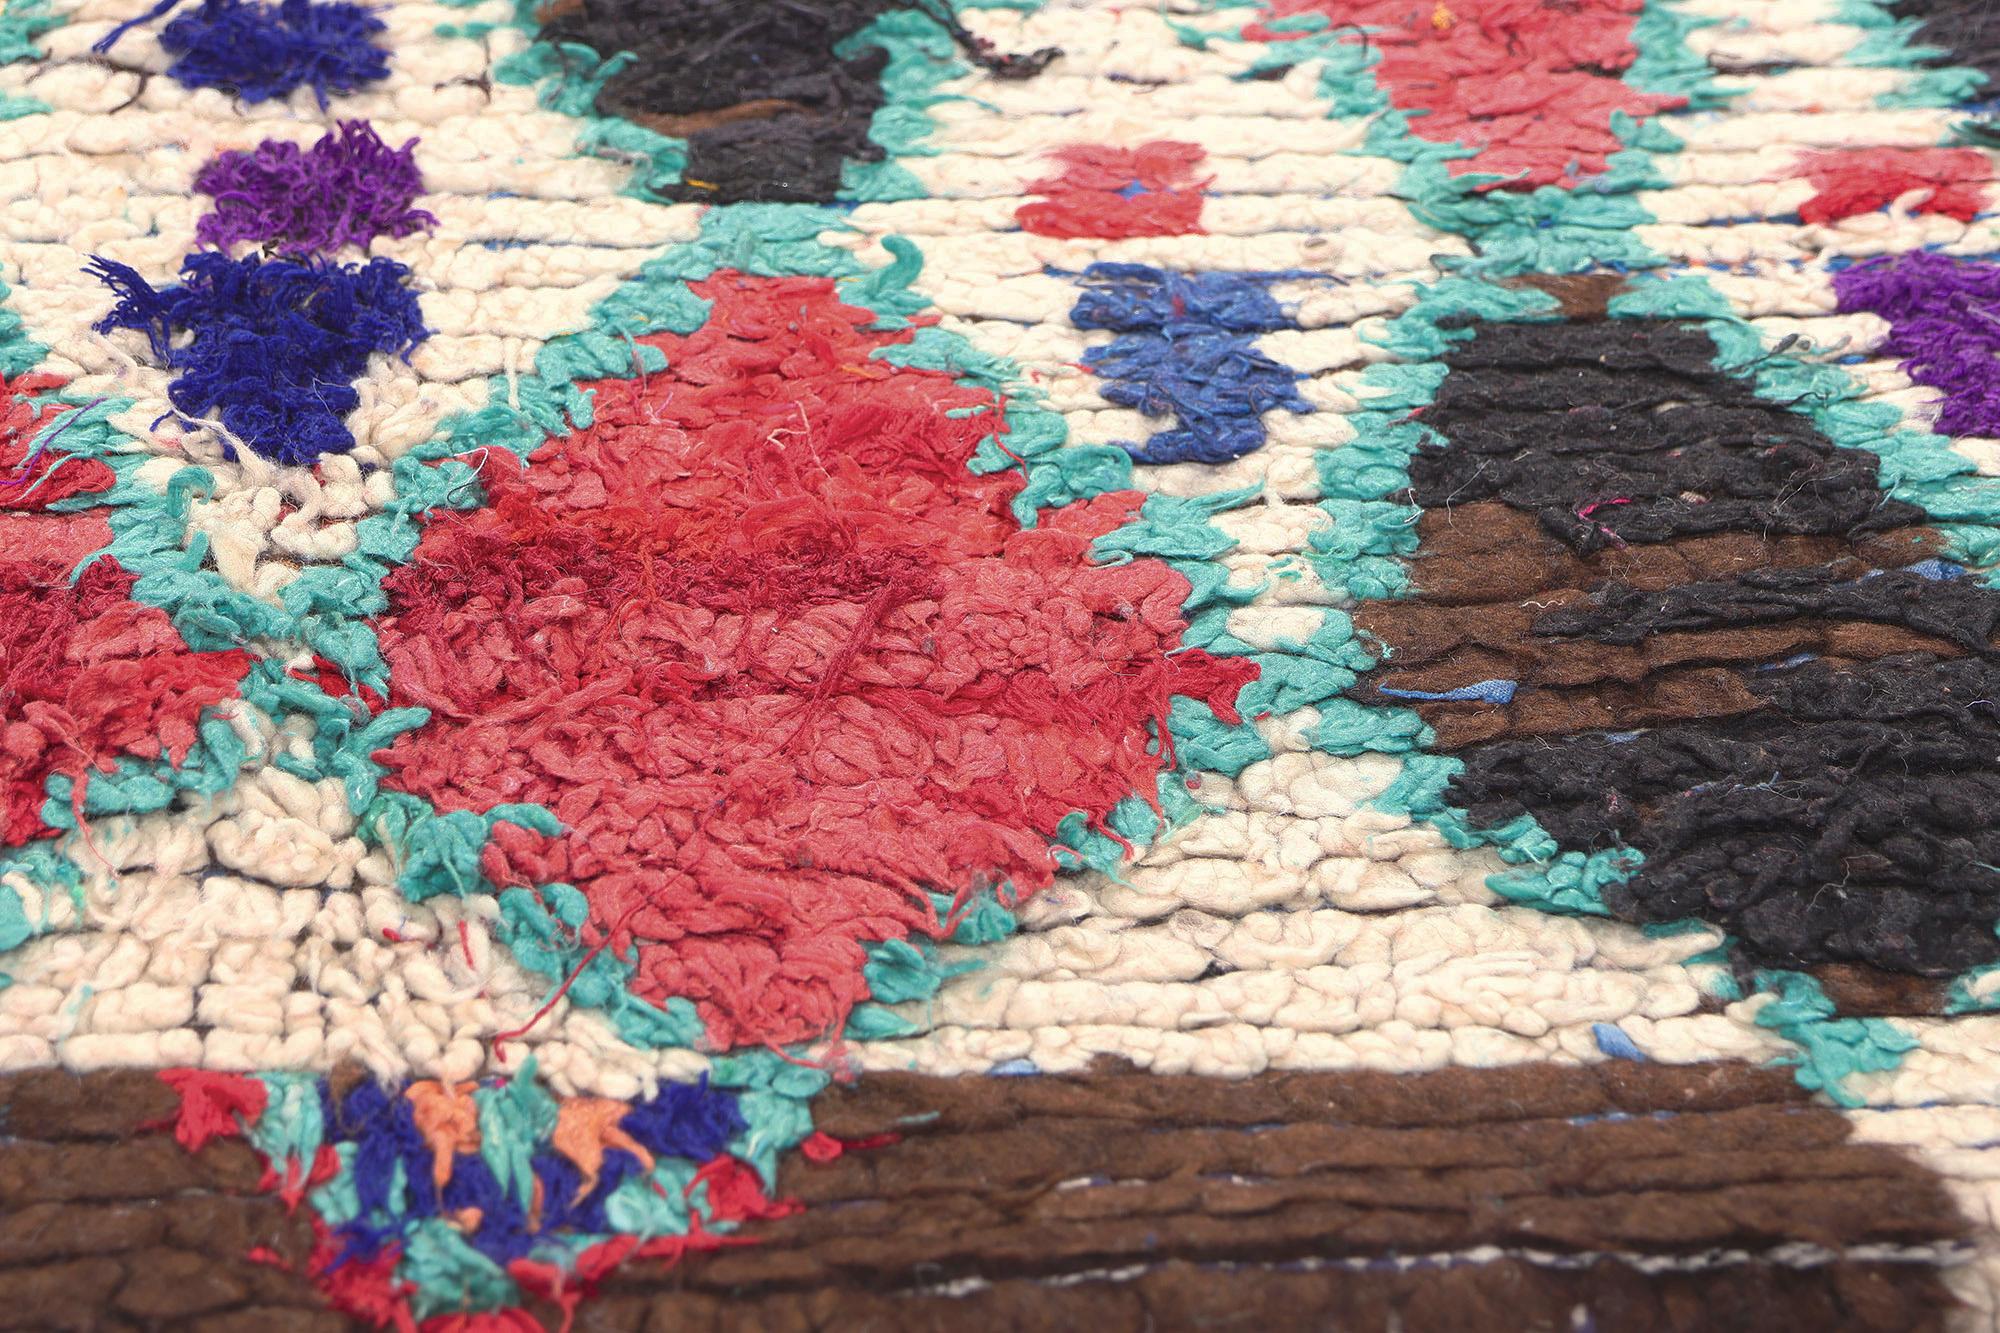 Vintage Boucherouite Moroccan Azilal Rag Rug by Berber Tribes of Morocco In Good Condition For Sale In Dallas, TX